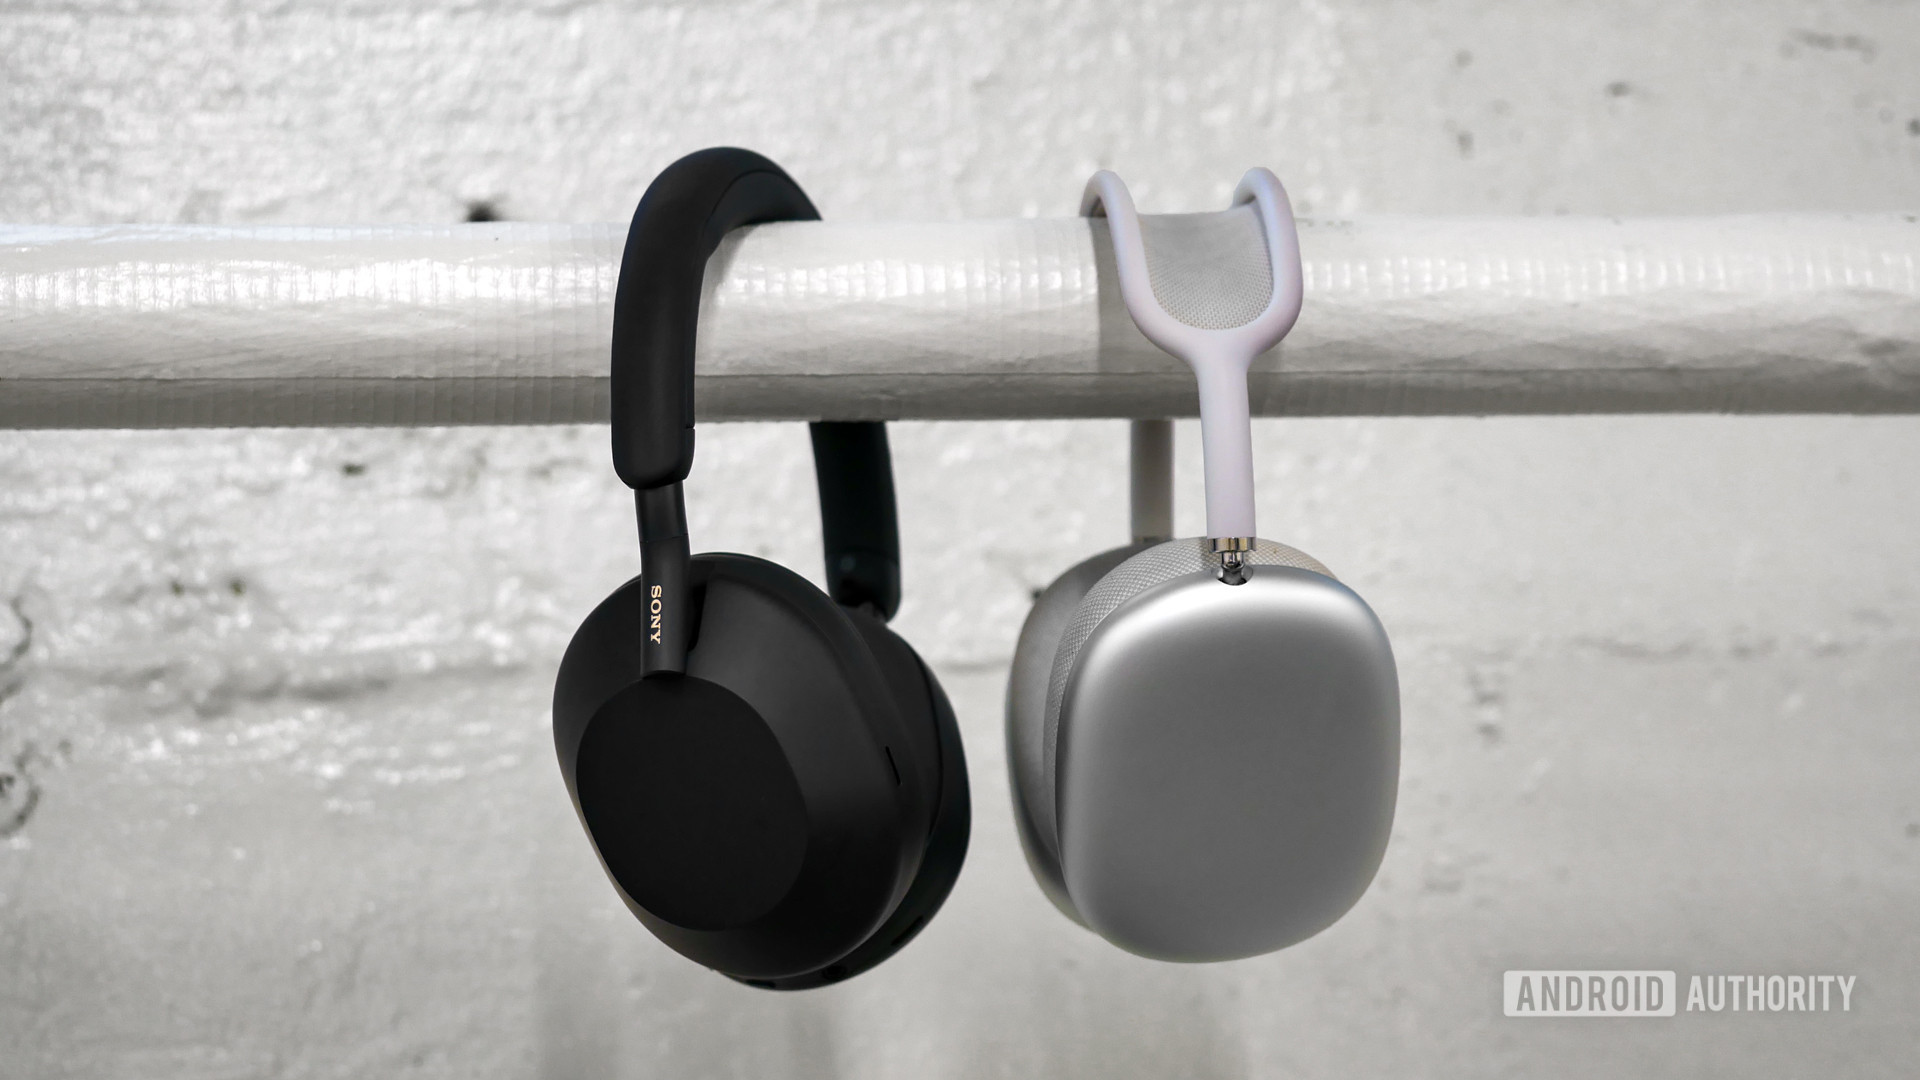 The Sony WH-1000xm5 next to the Apple AirPods Max.